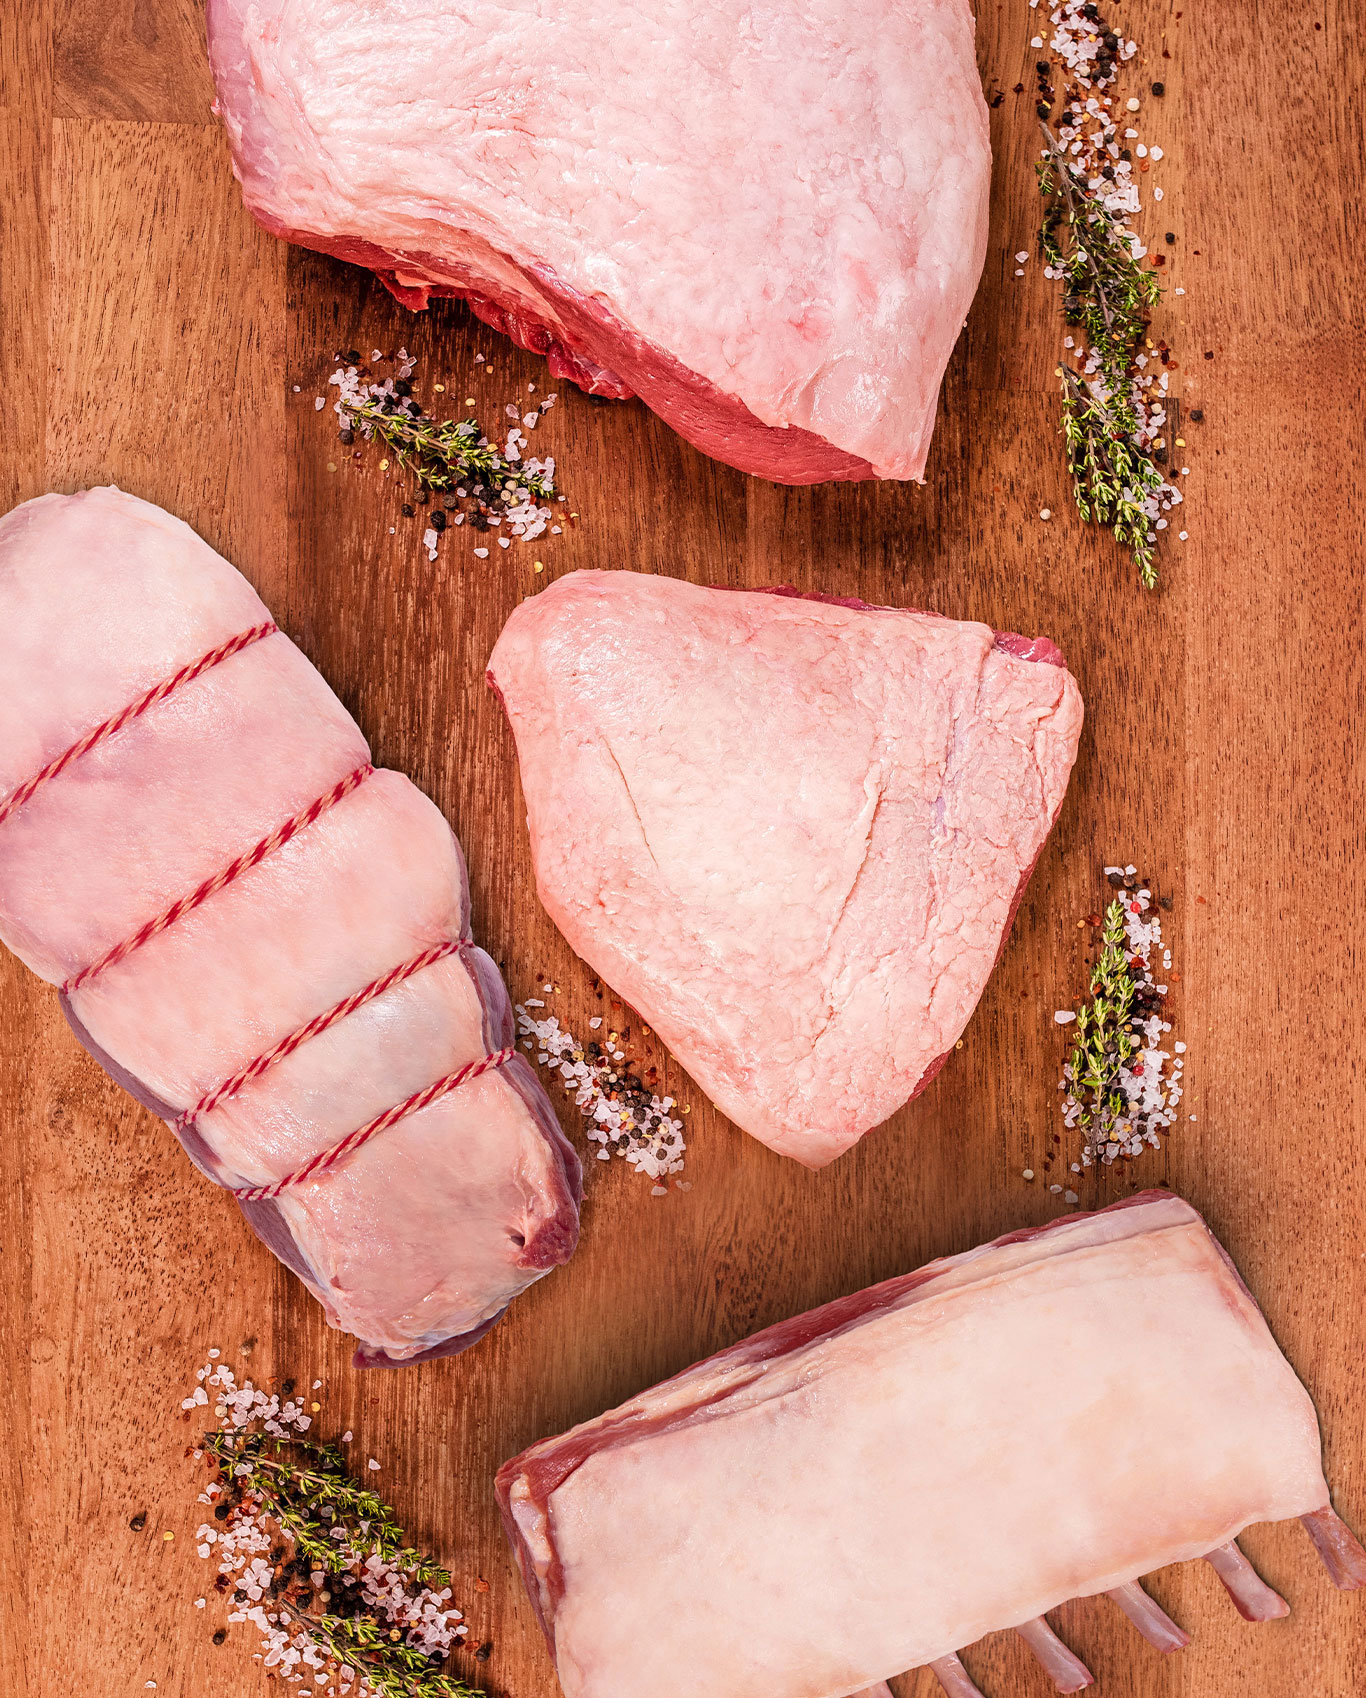 Wide selection of fresh meat solutions